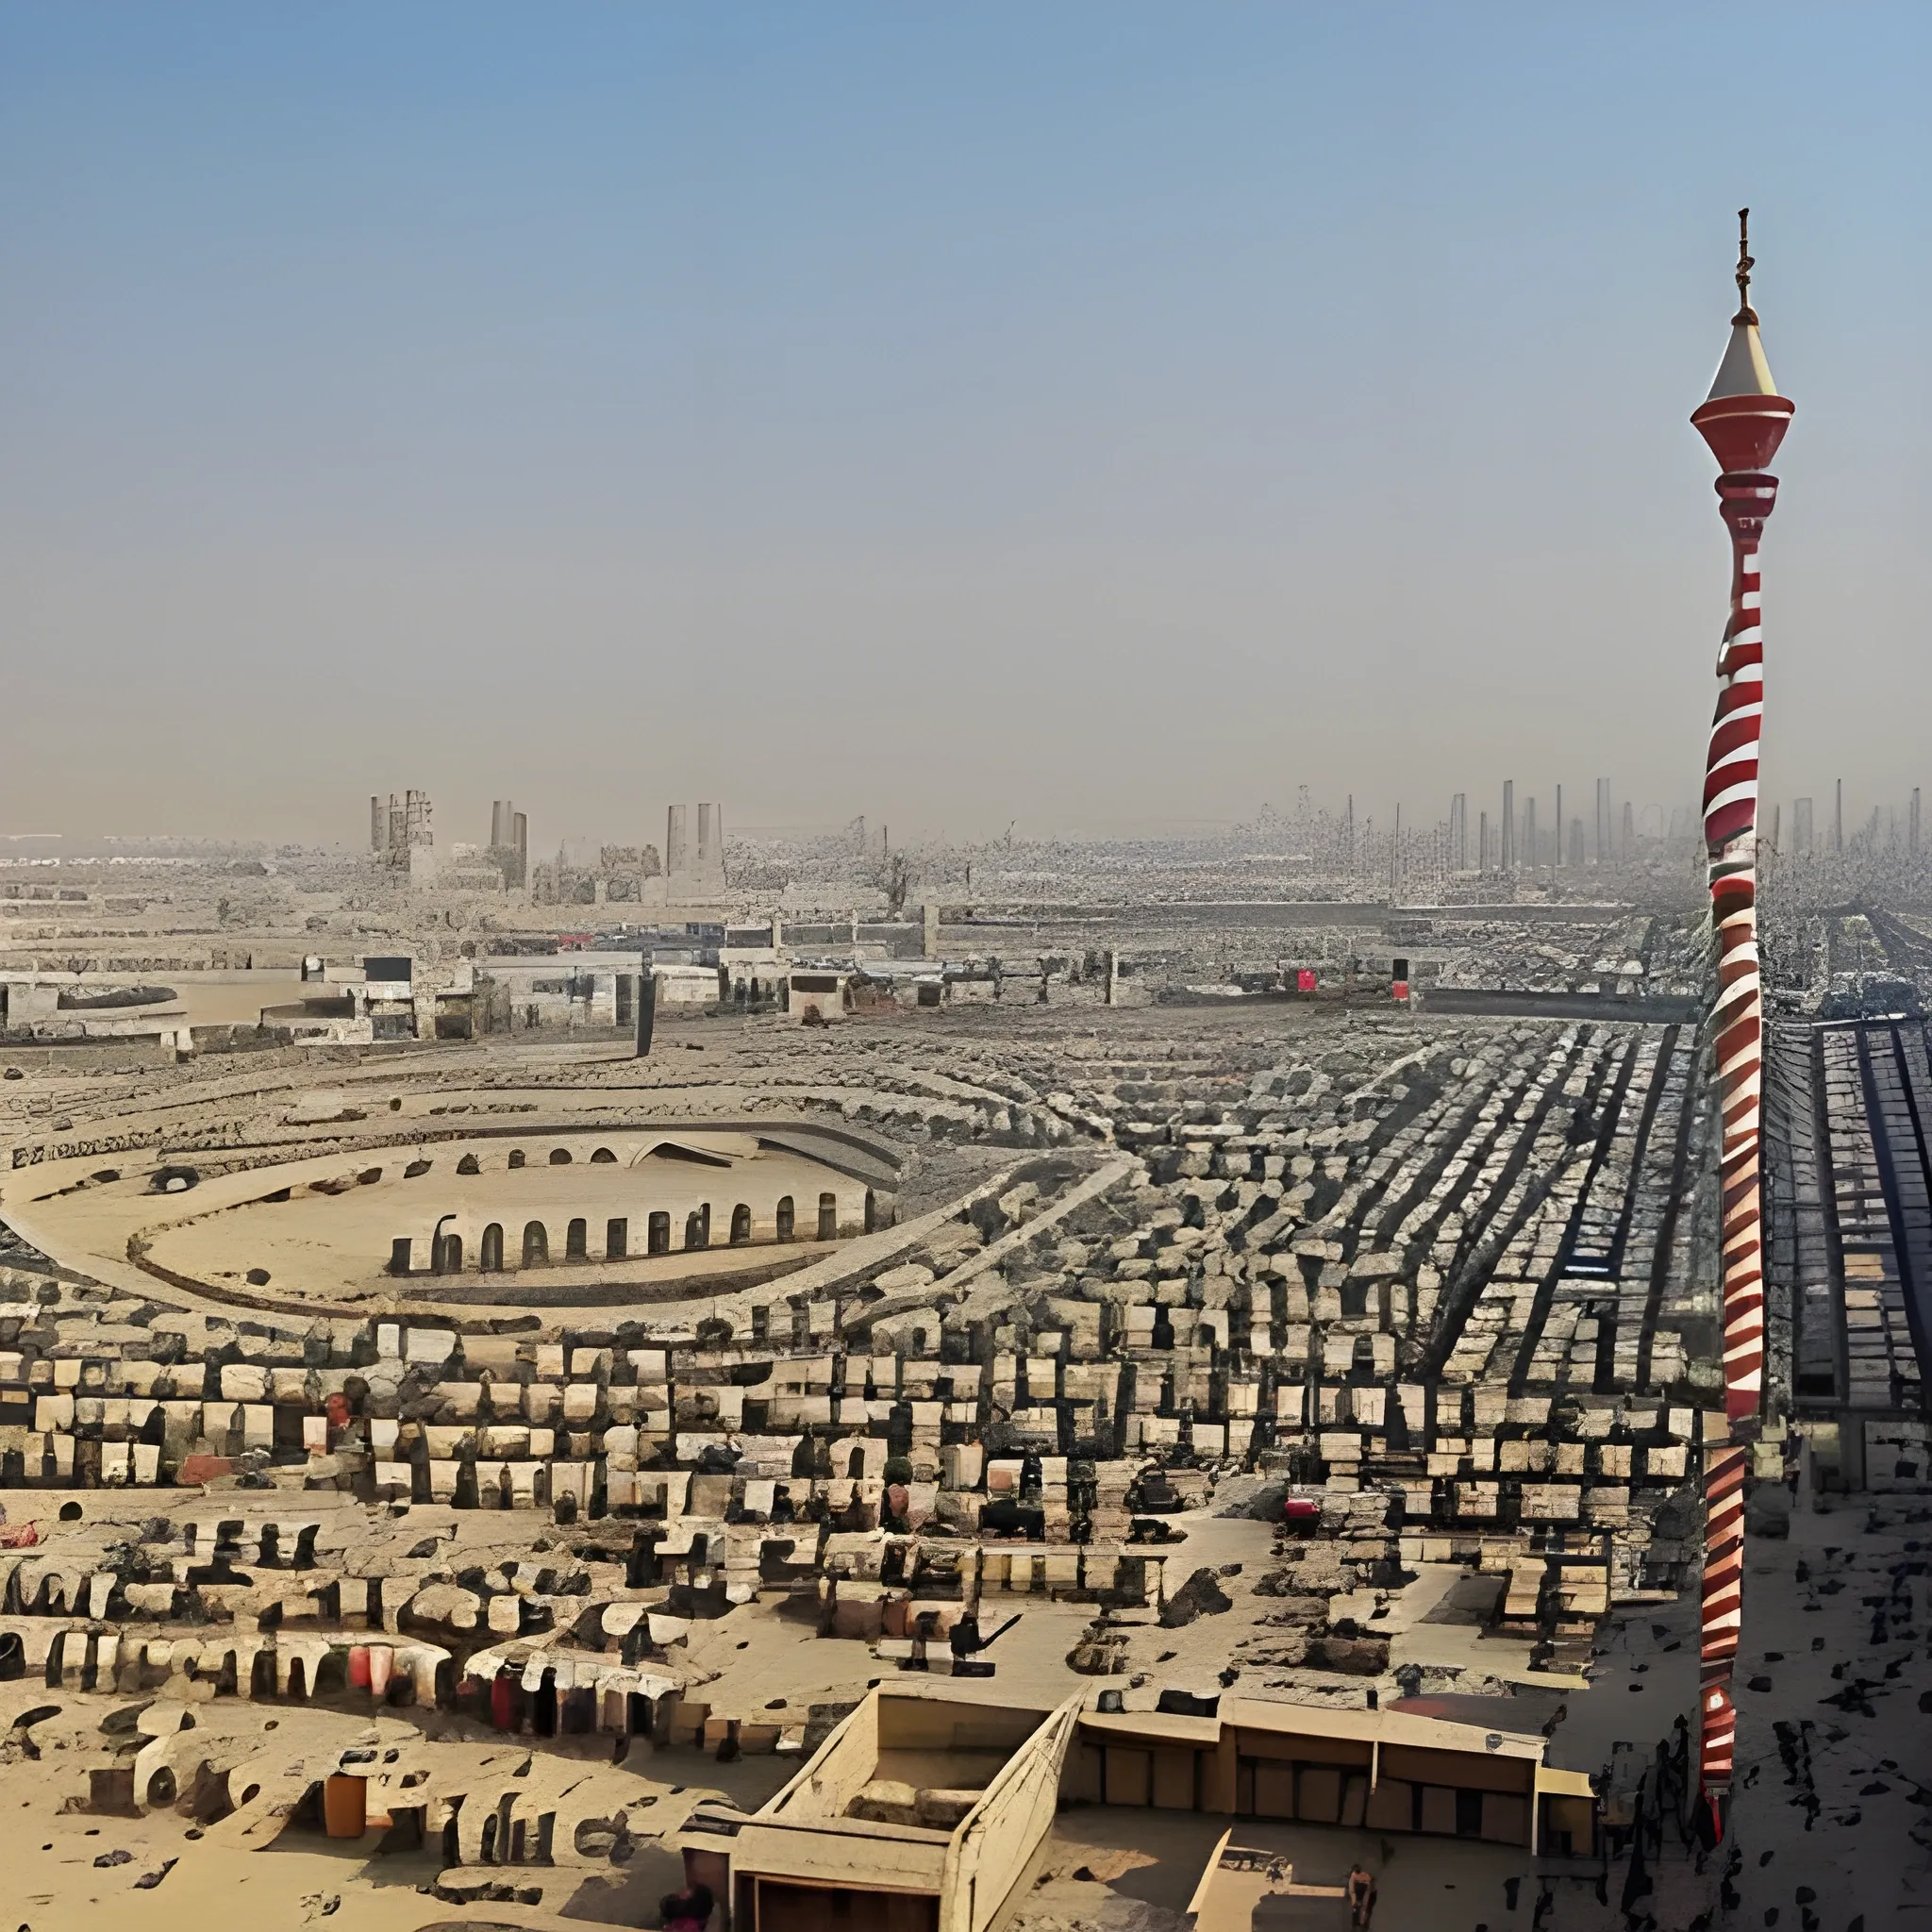 The city of Karbala and between the two cities